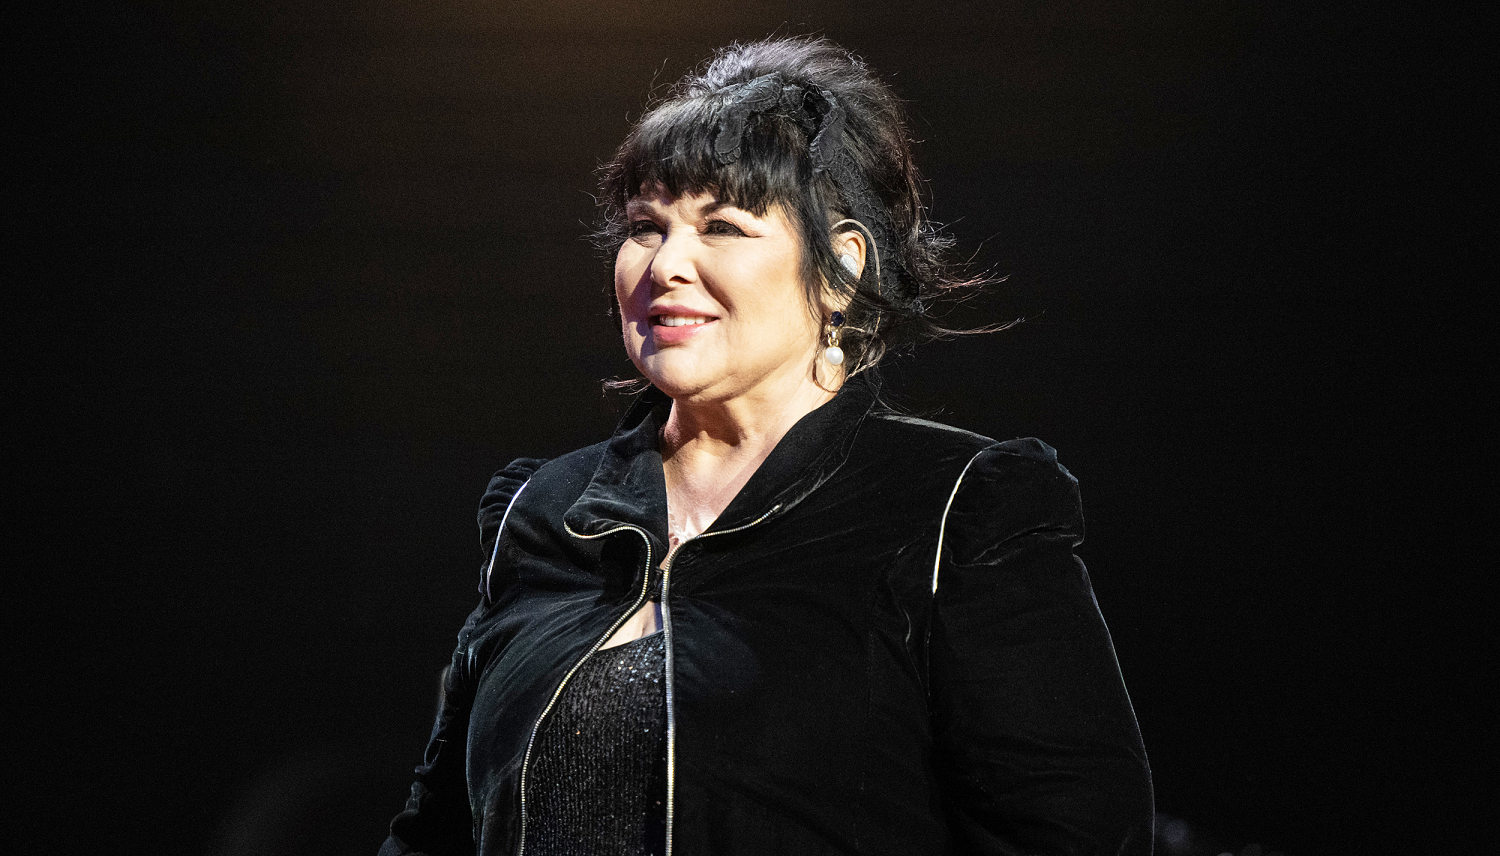 Heart’s Ann Wilson undergoing preventive chemotherapy for cancer, band postpones tour 